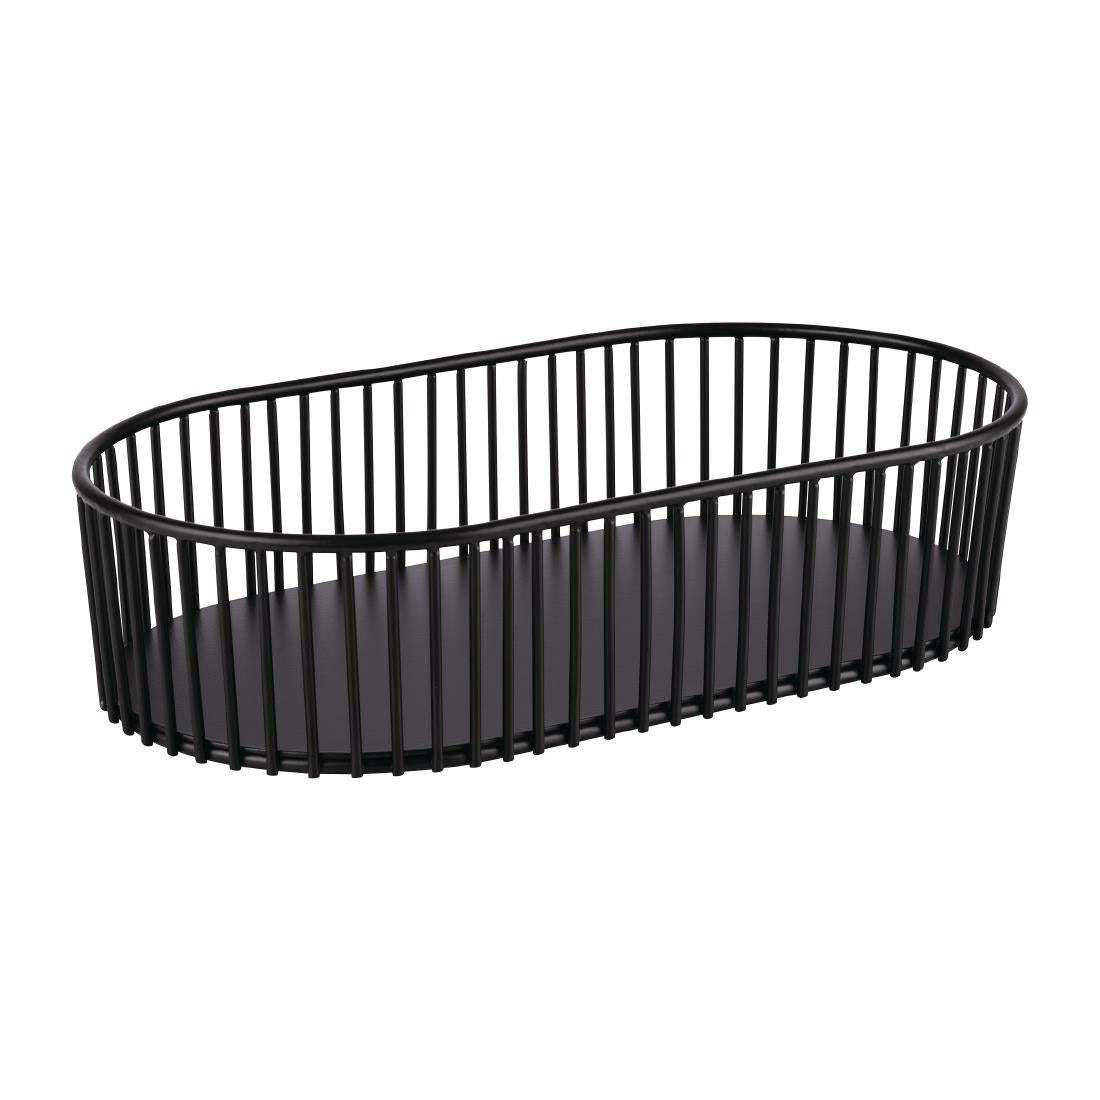 FT176 APS Oval Basket 290 x 160mm JD Catering Equipment Solutions Ltd